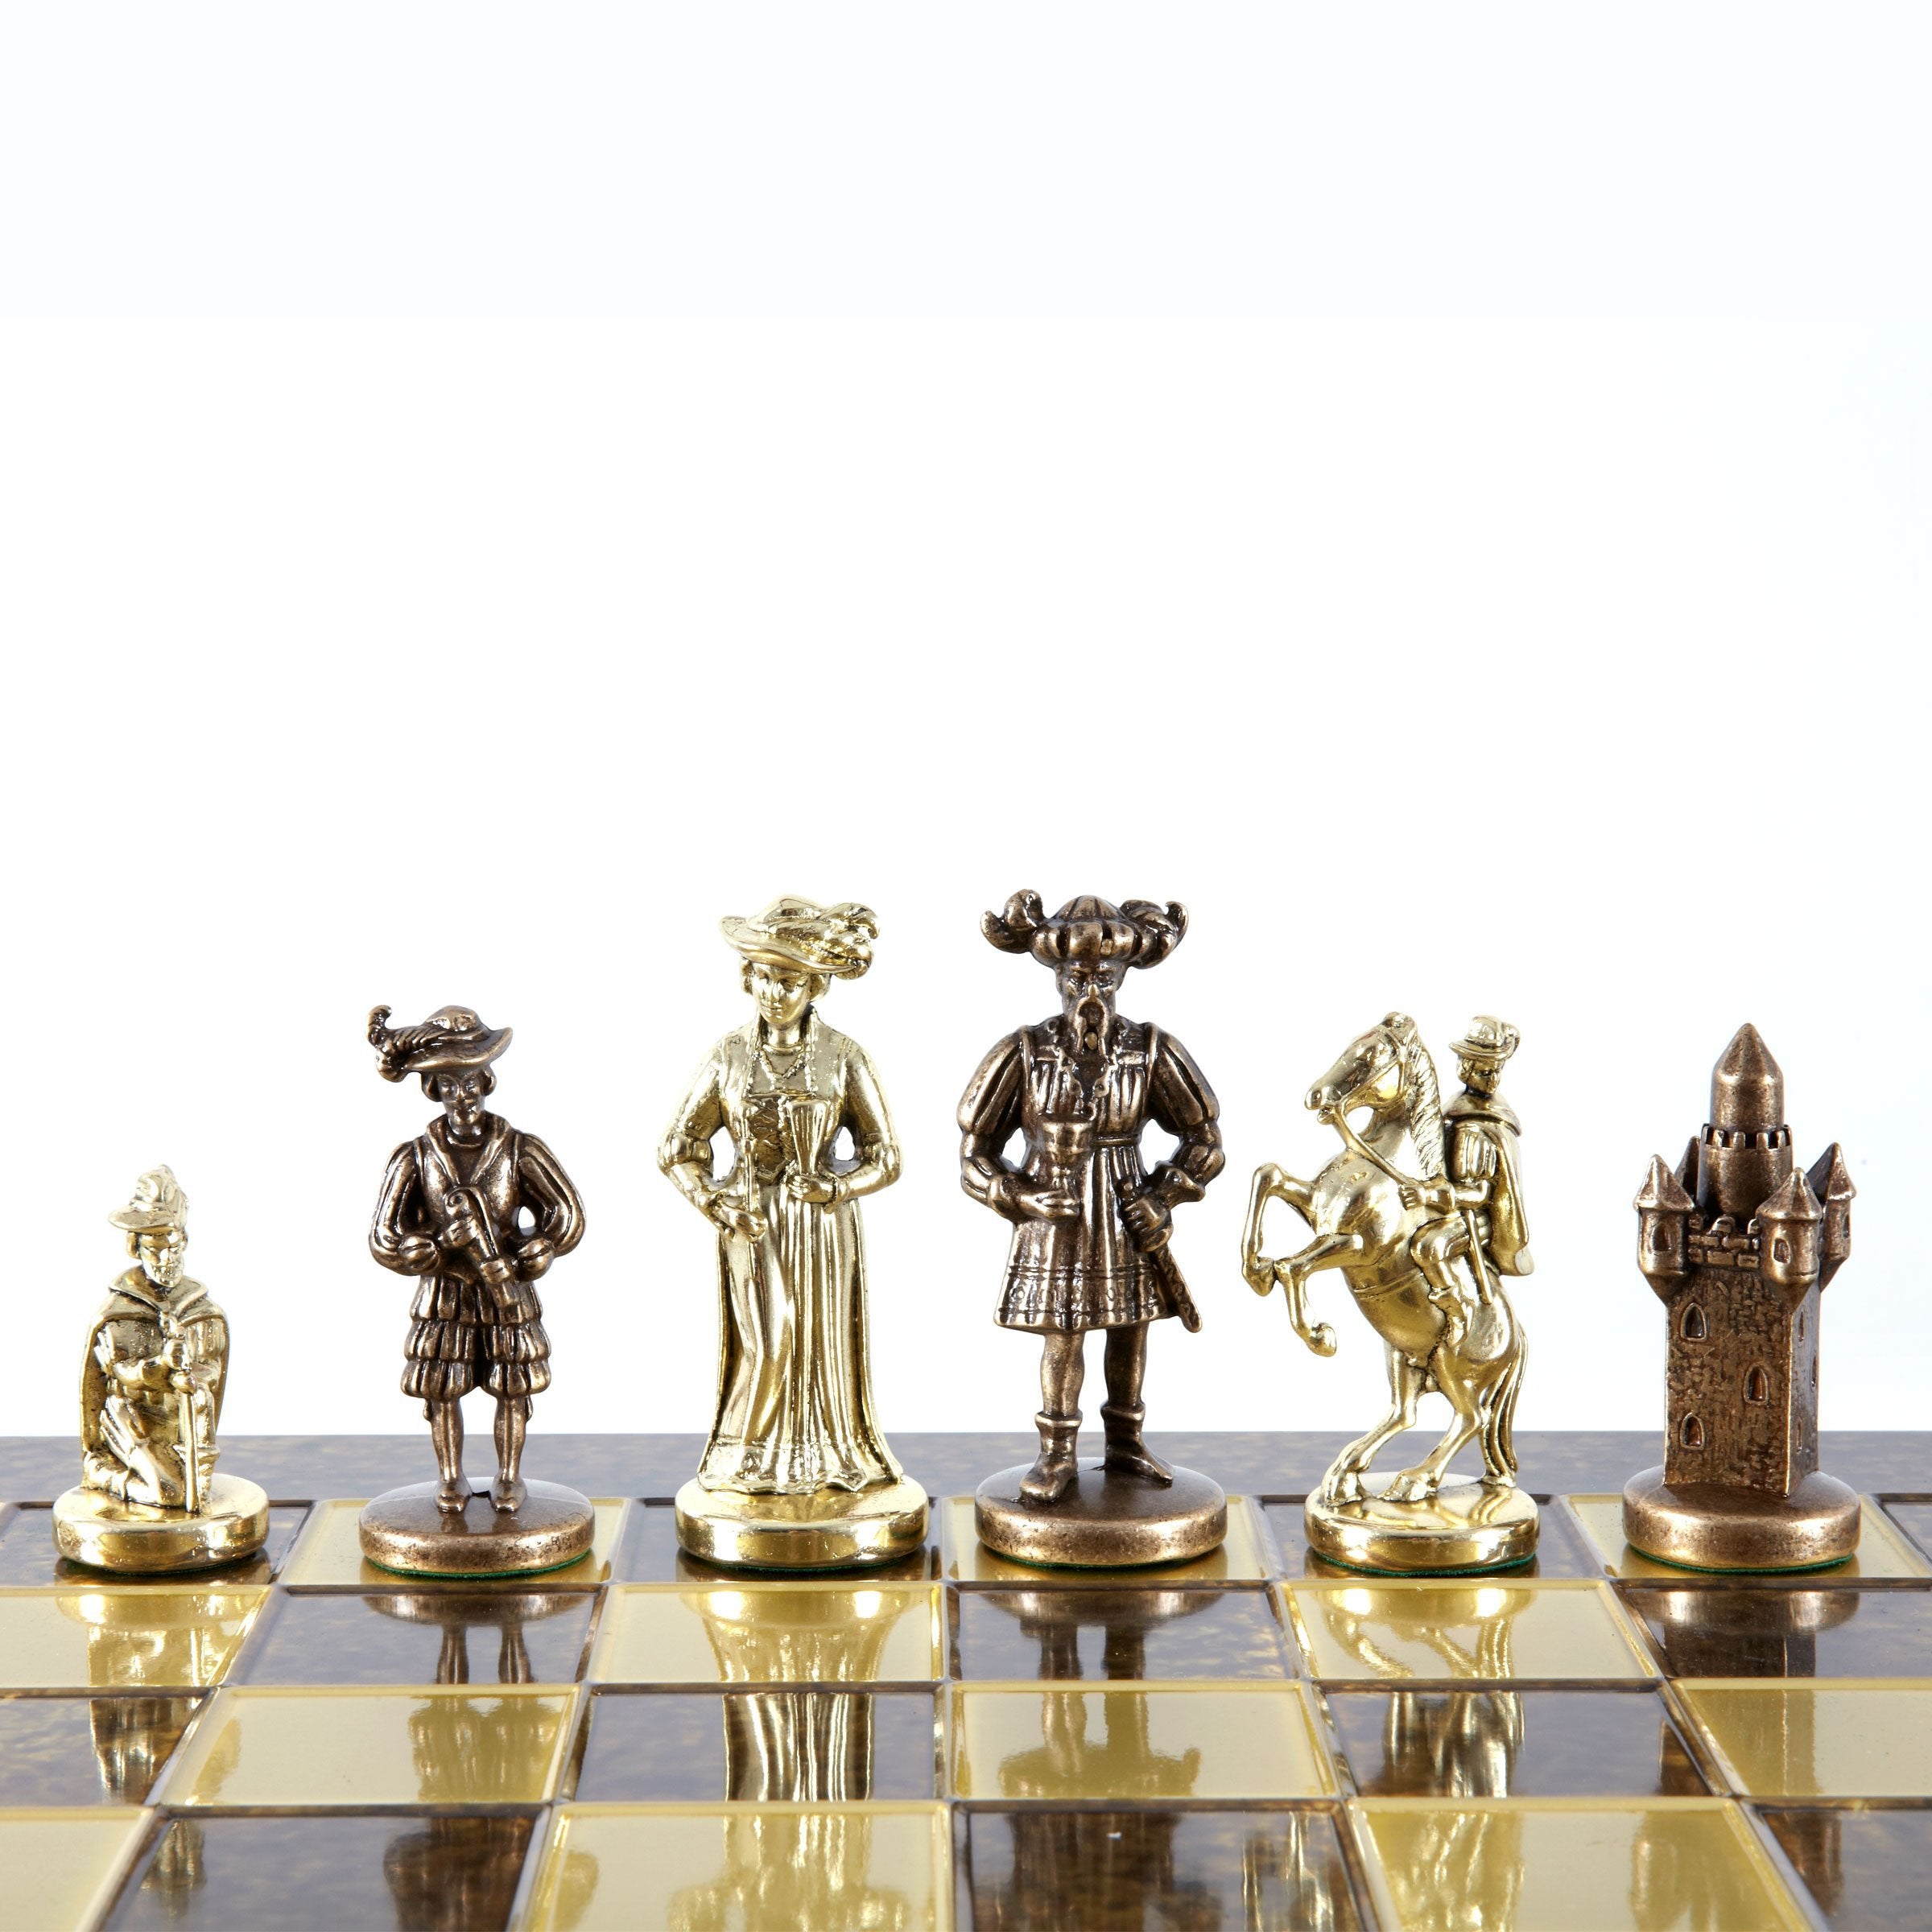 Medieval Knights Chess Set - 17"